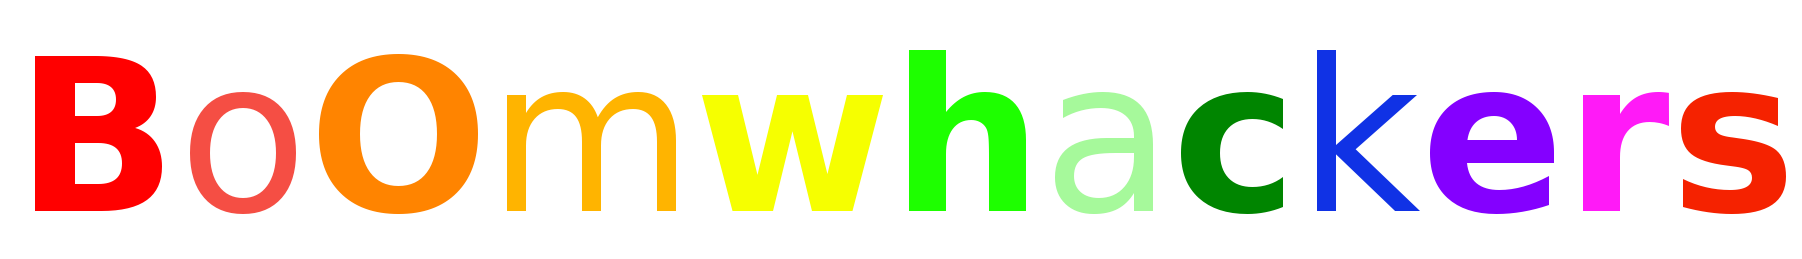 boomwhackers logo